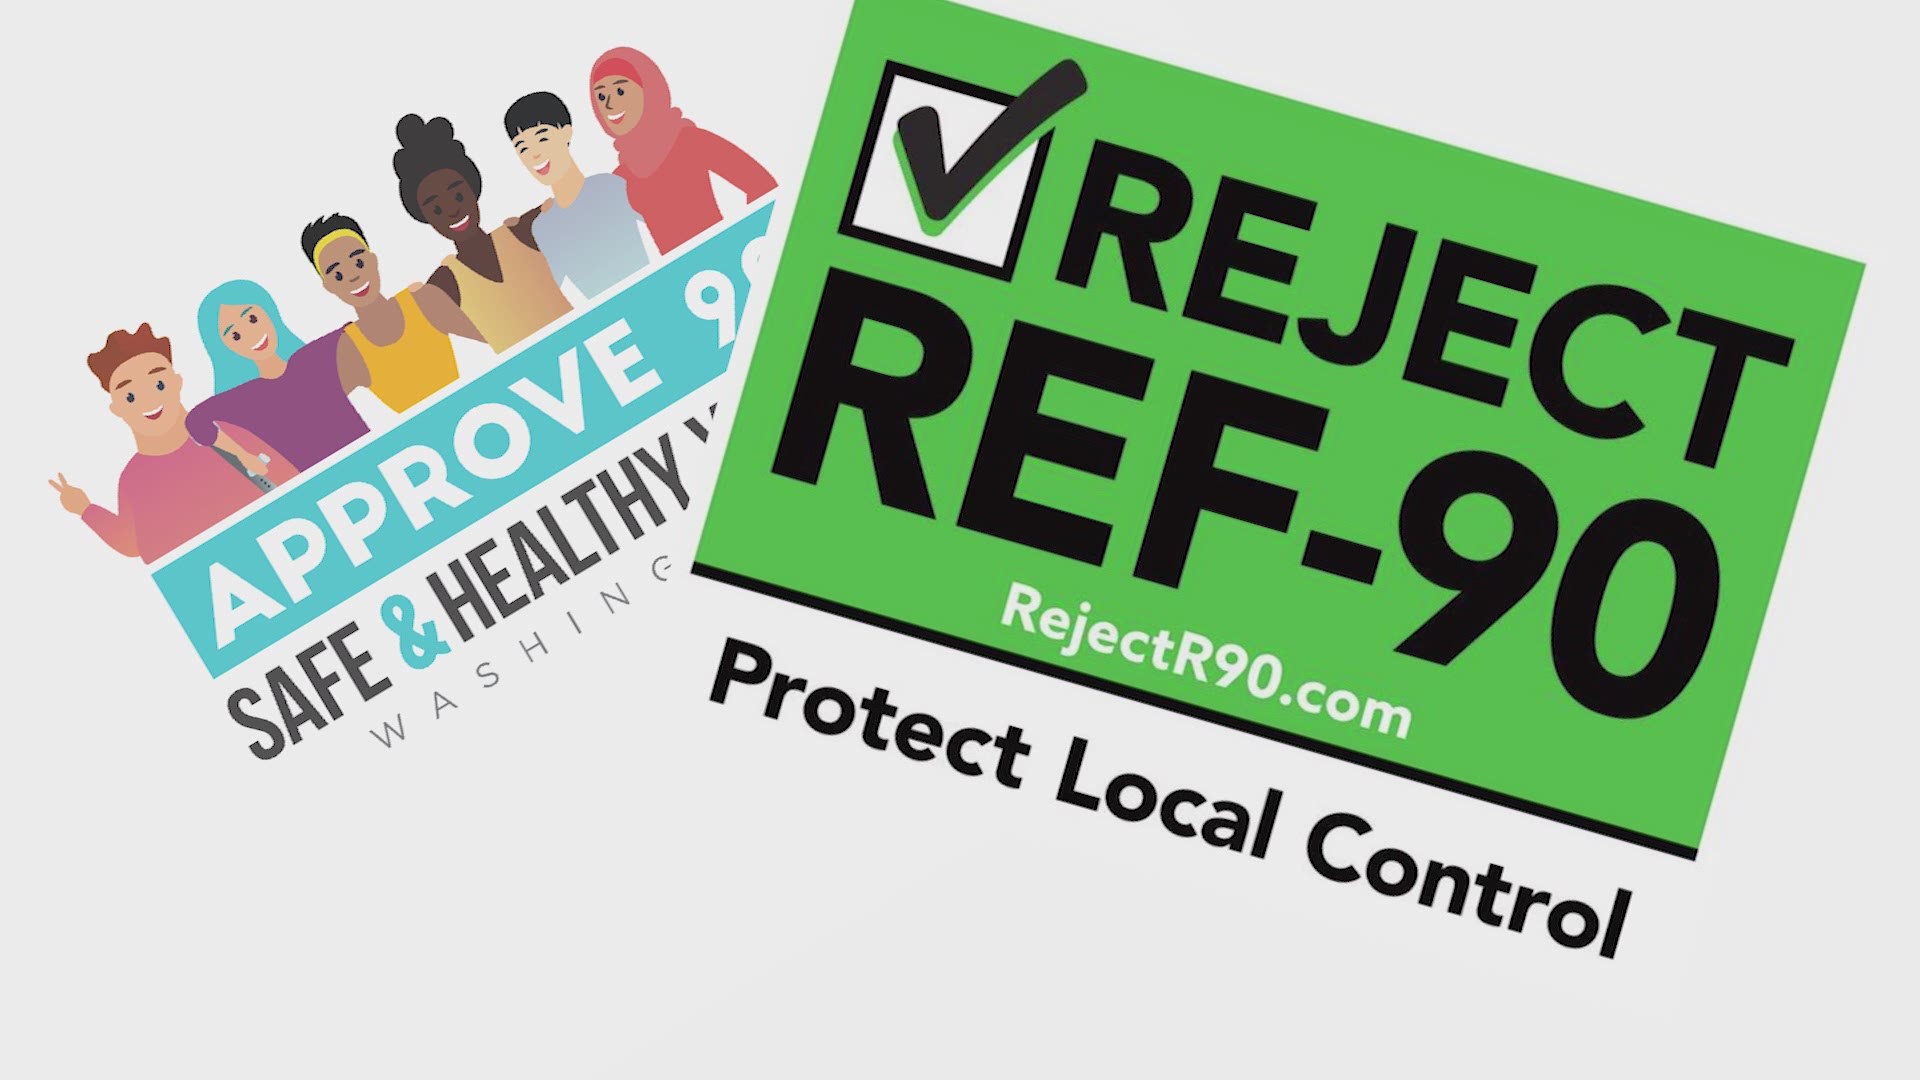 Referendum 90 requires public schools in Washington state to provide sexual health education to all students.